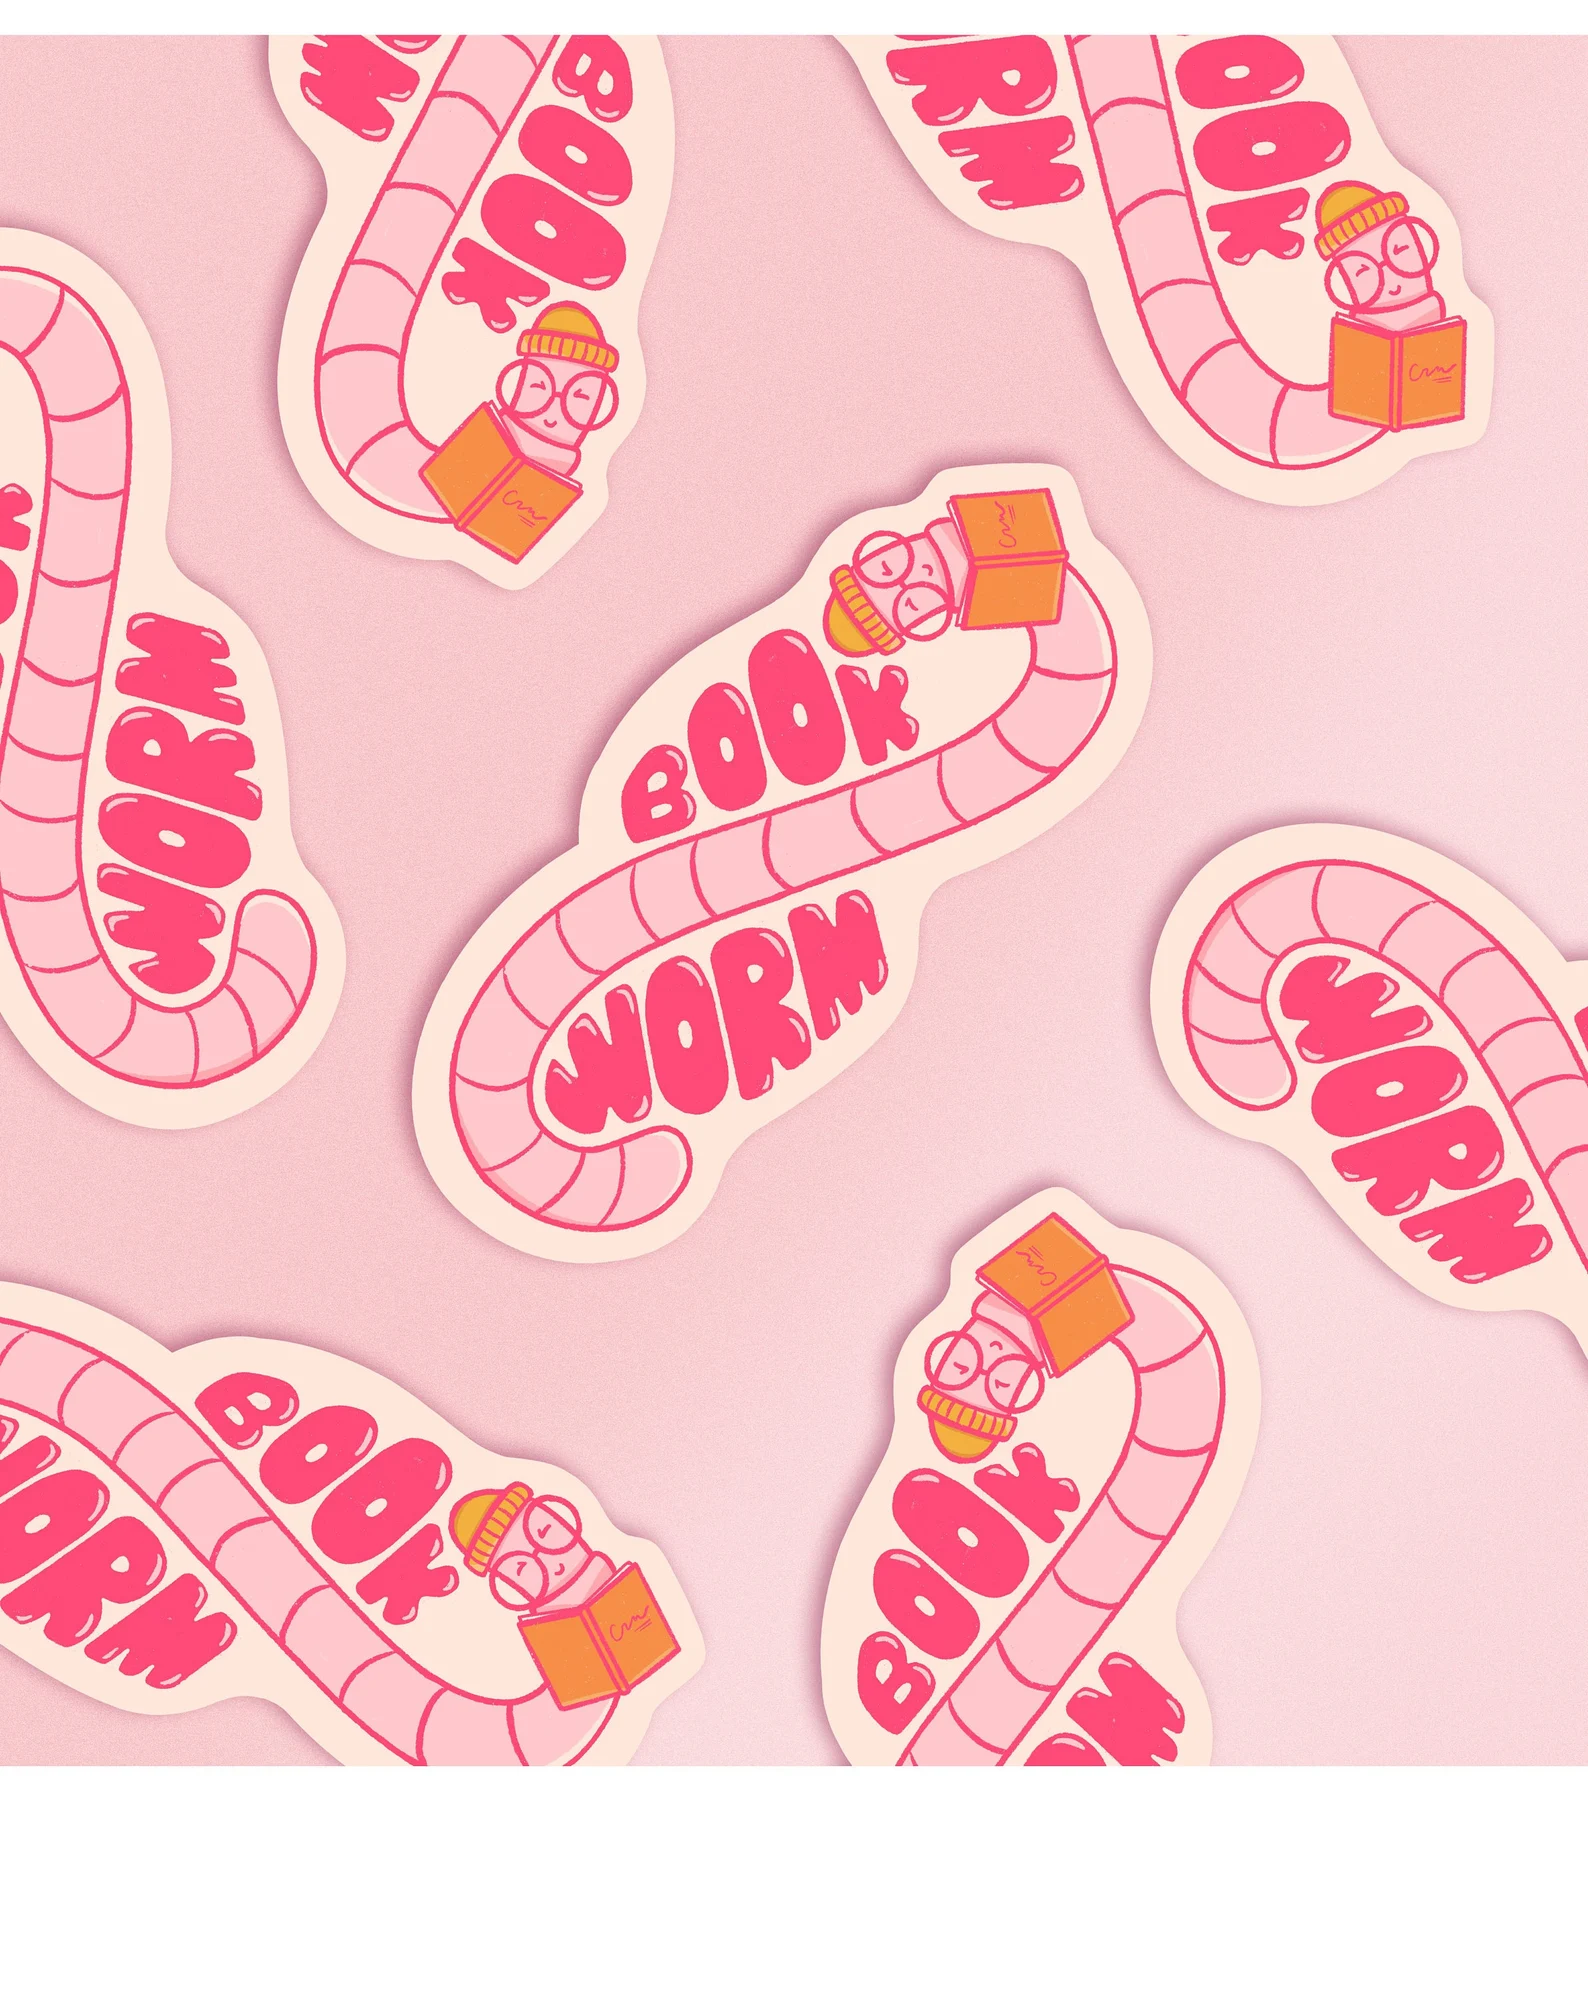 Several pink stickers featuring a worm wearing a hat. The words "book worn" surround it. 